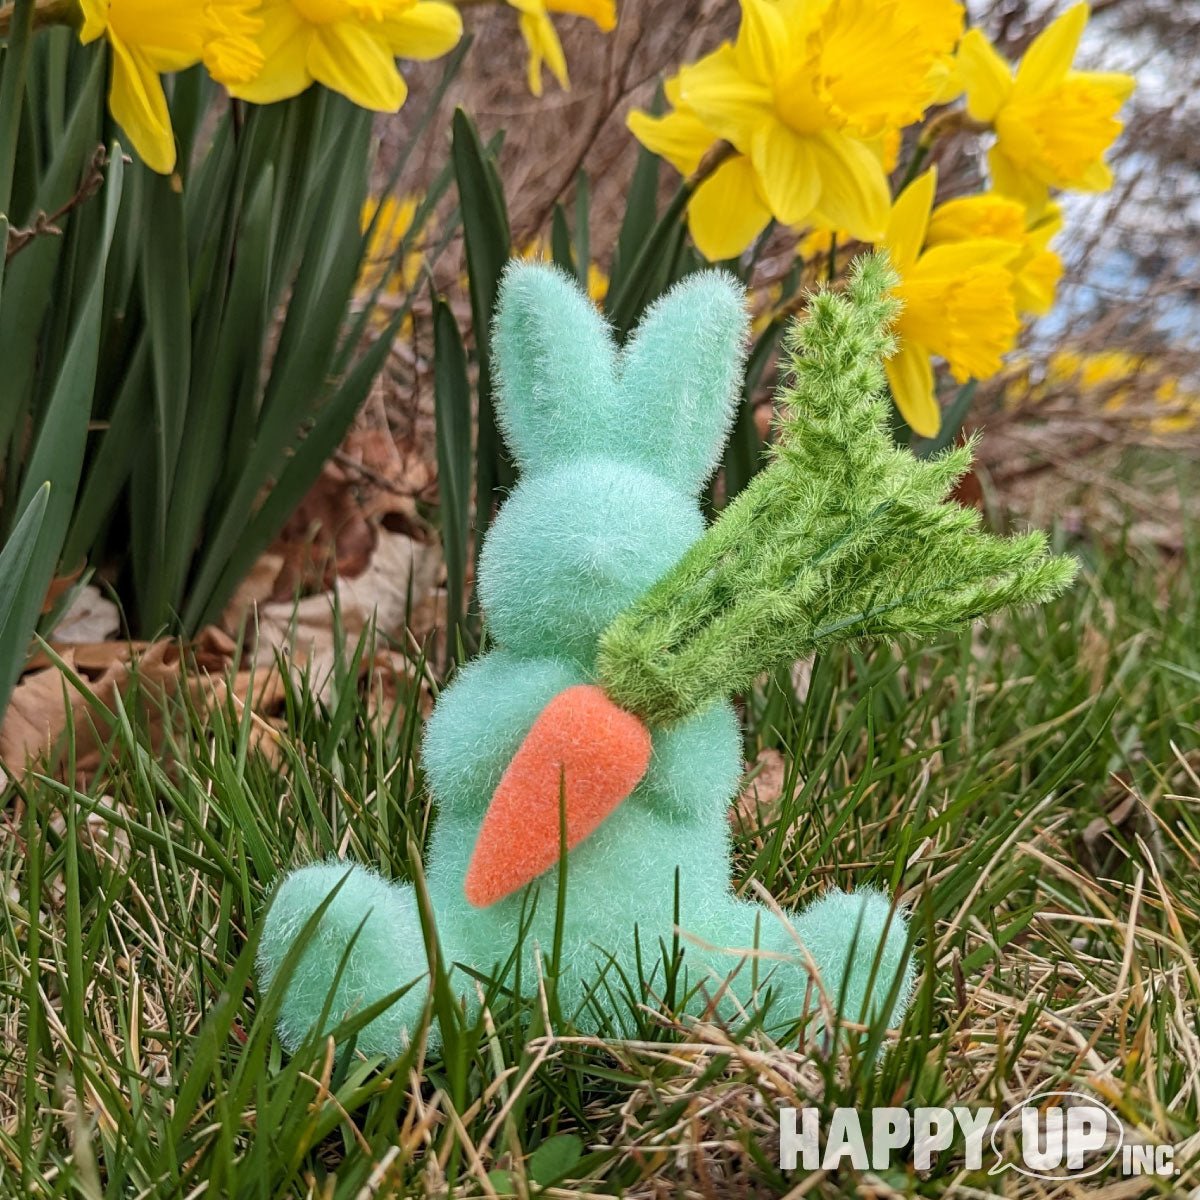 Flocked Bunny with Carrot